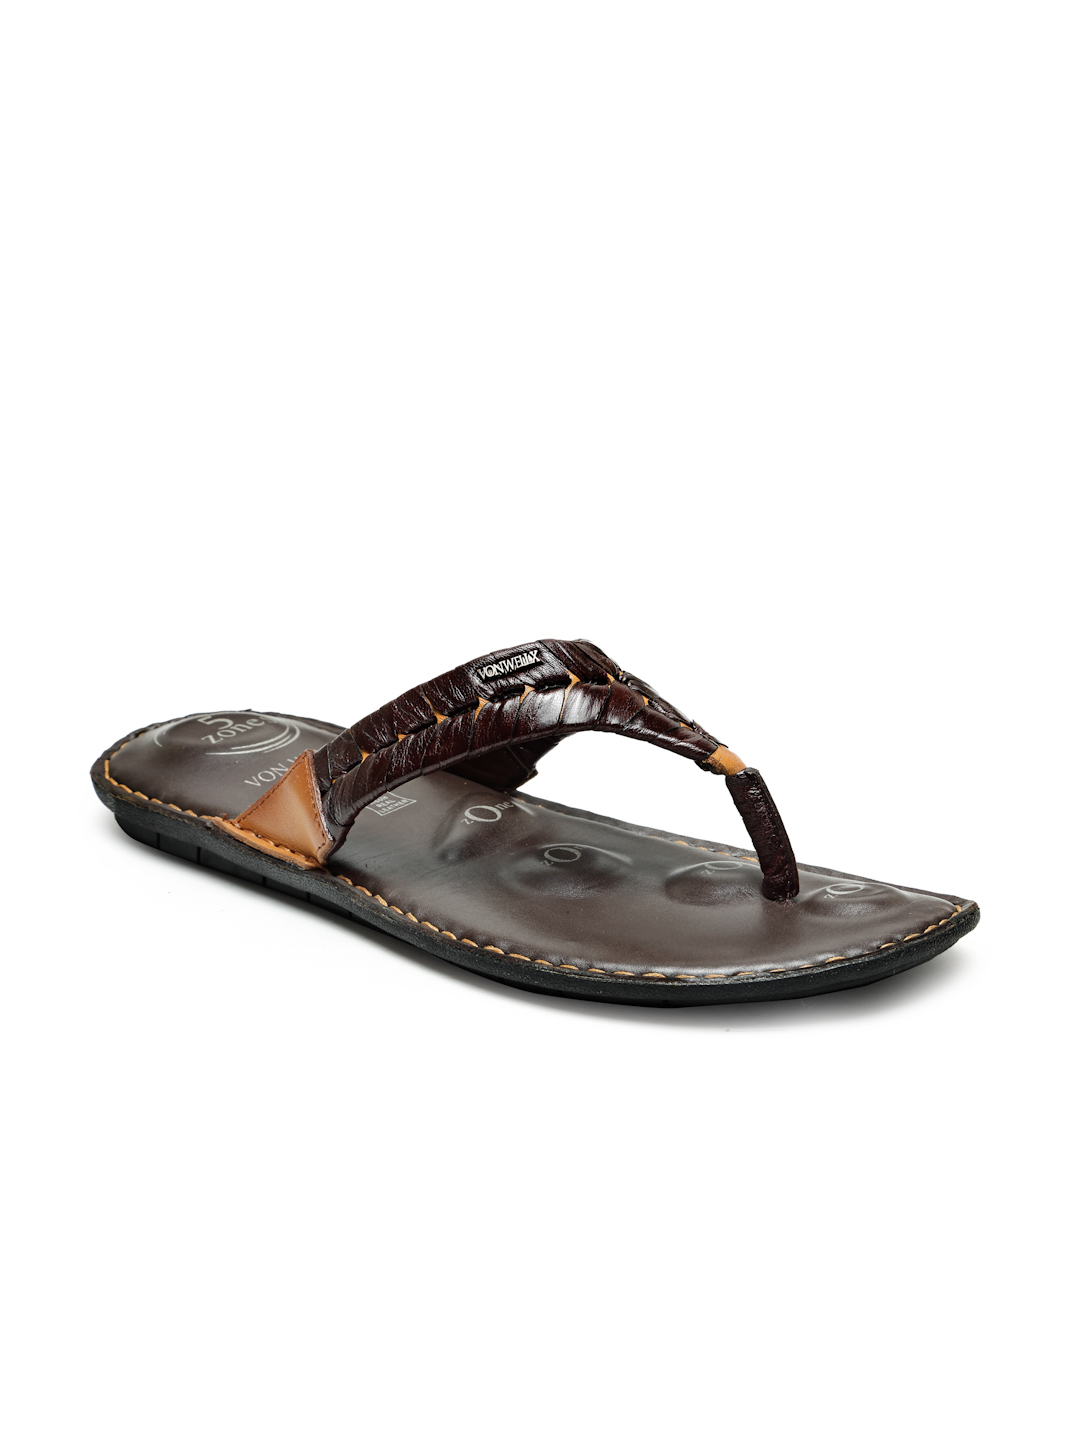 Buy Von Wellx Germany Comfort Men's Tan Slippers Alonso Online in Udaipur